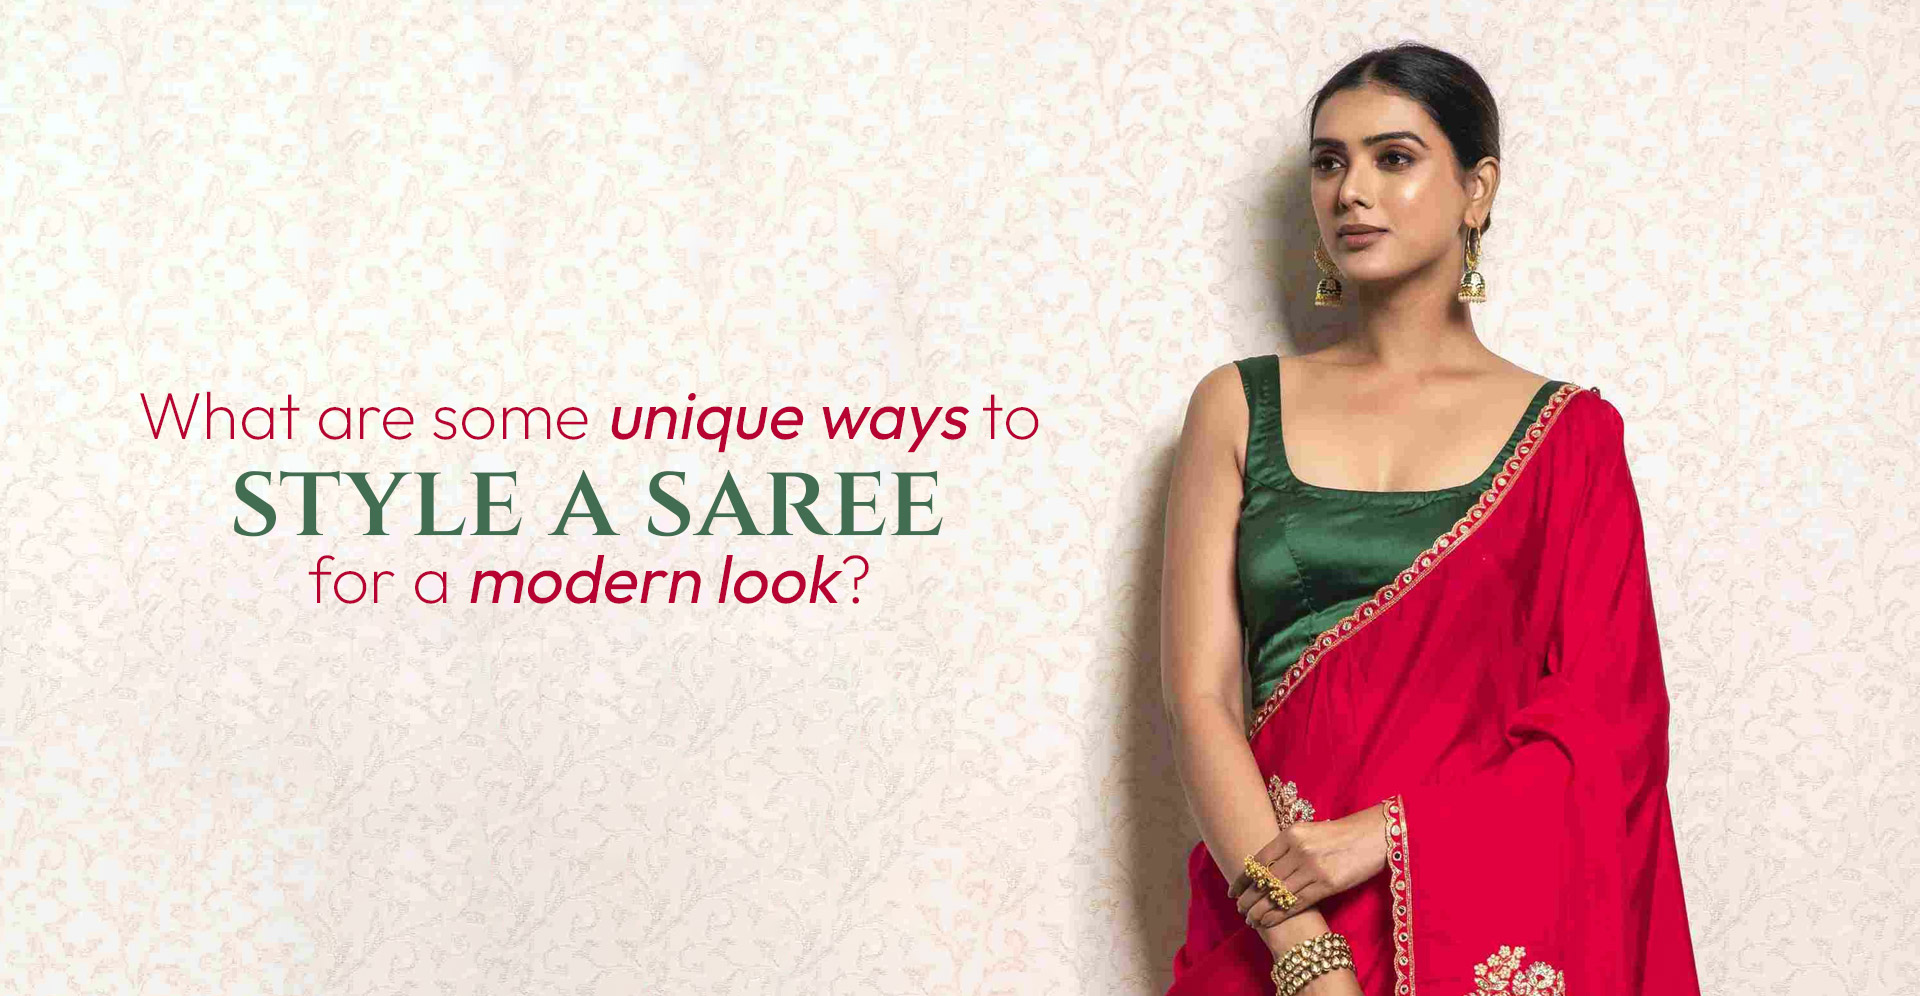 What Are Some Unique Ways to Style a Saree for a Modern Look?